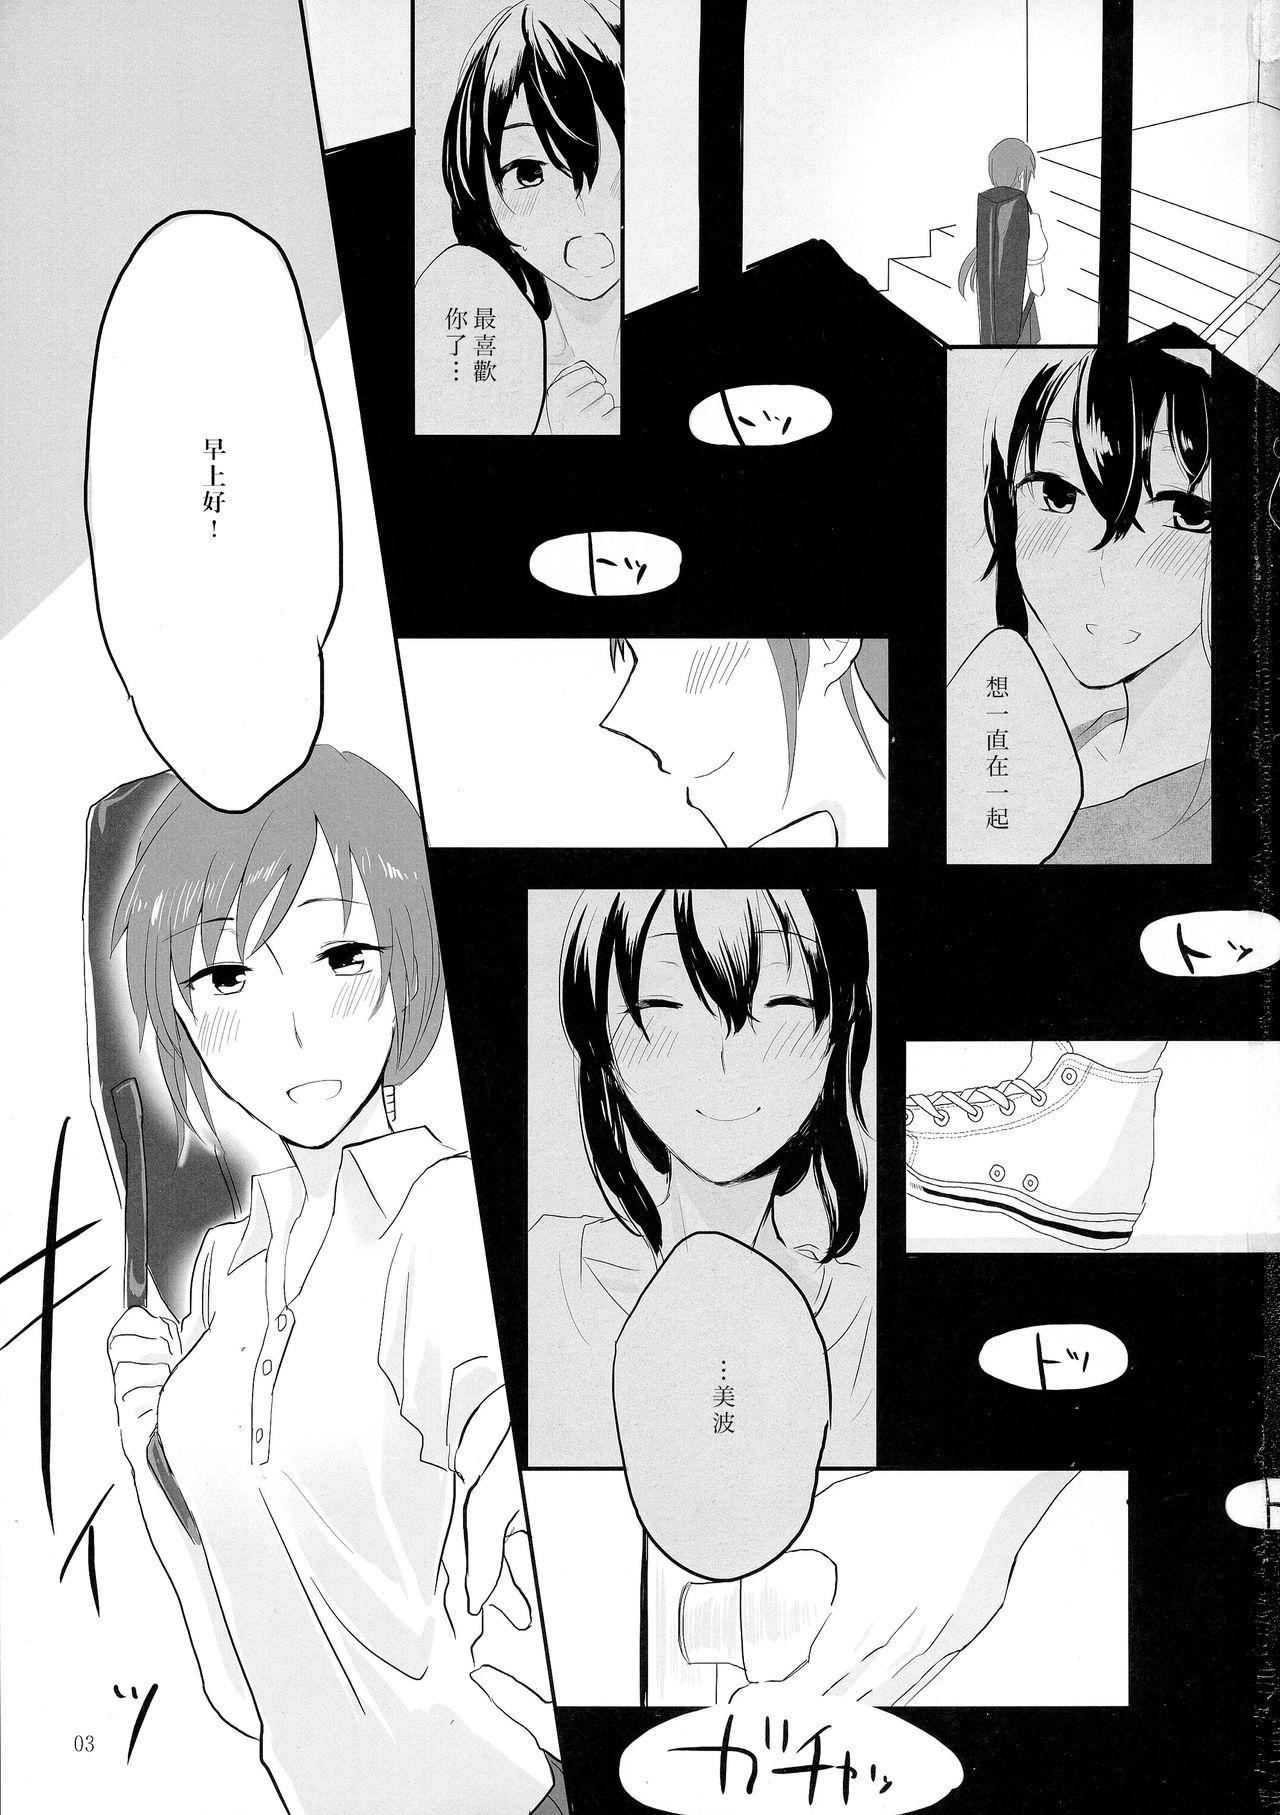 Pasivo obsessed - The idolmaster Hard - Page 4